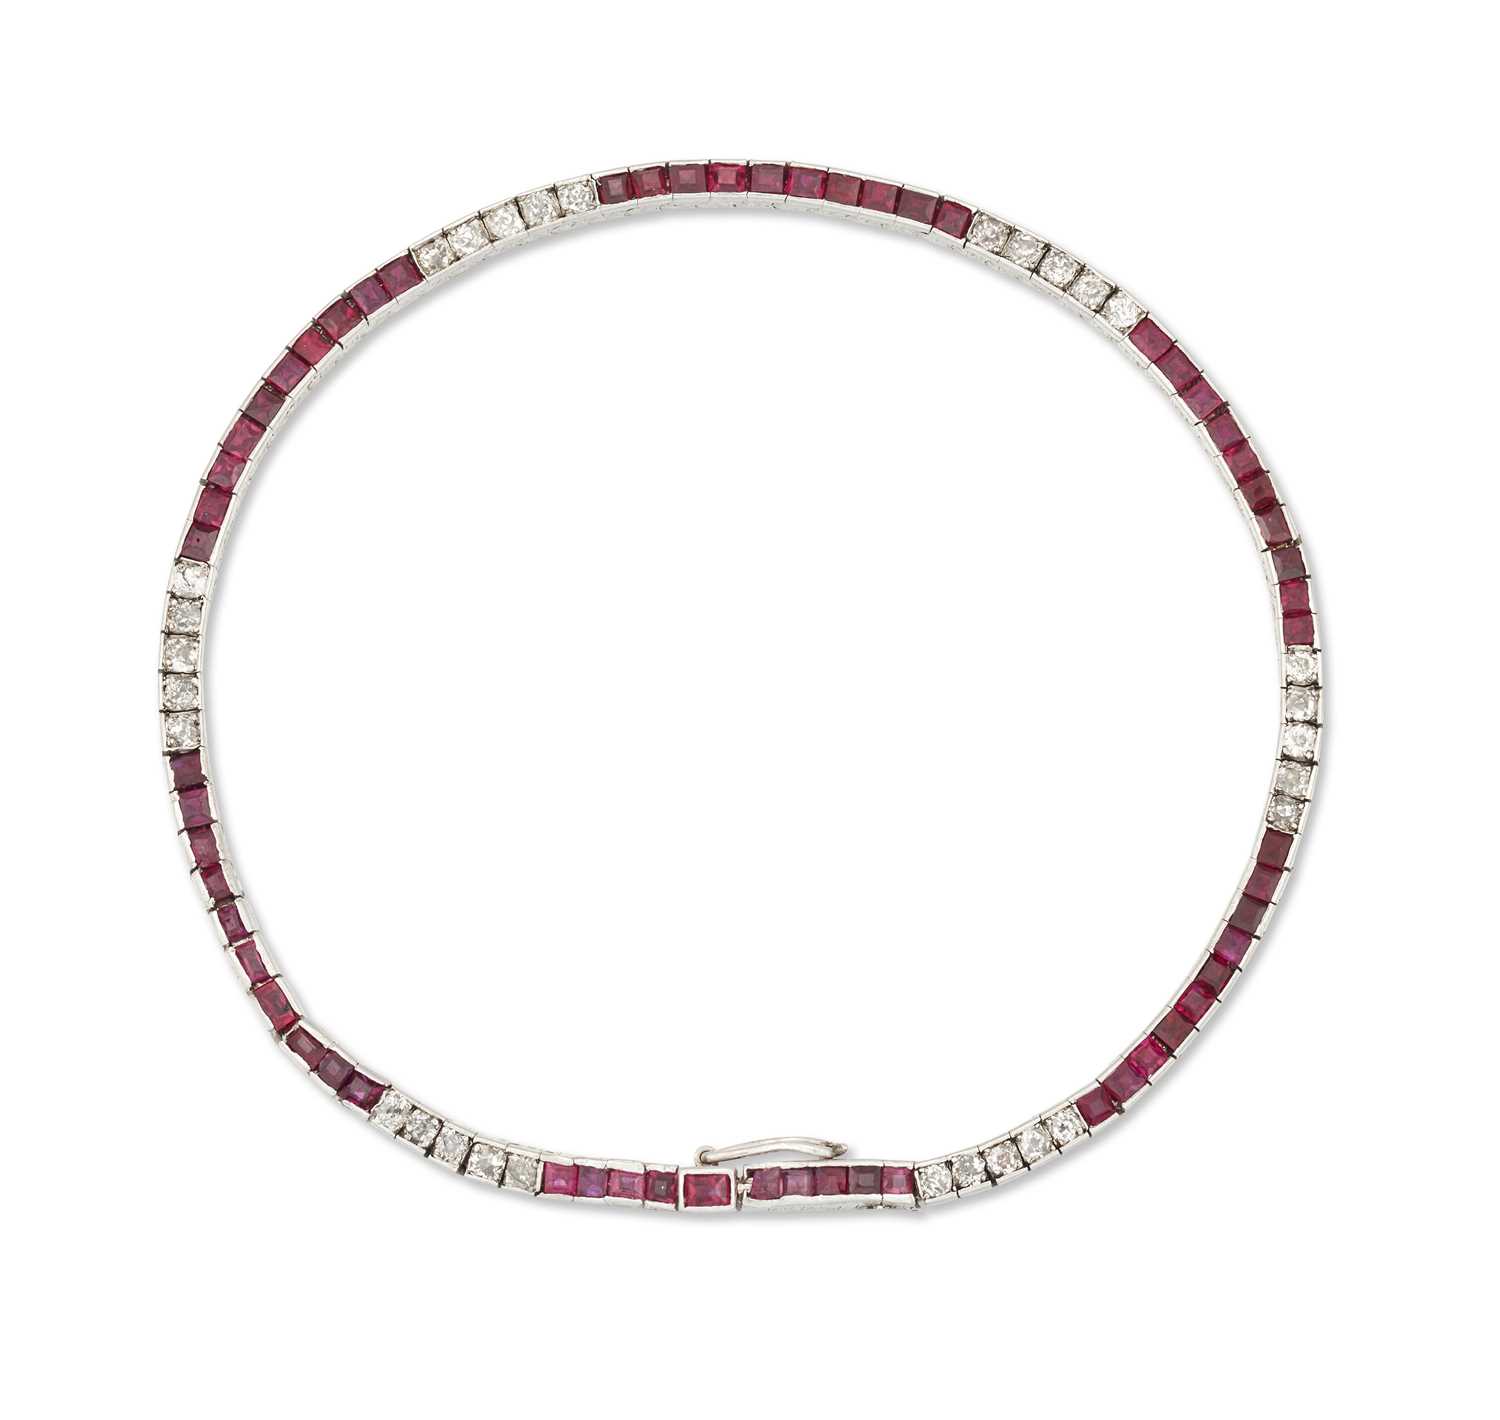 AN EARLY 20TH CENTURY RUBY AND DIAMOND LINE BRACELET